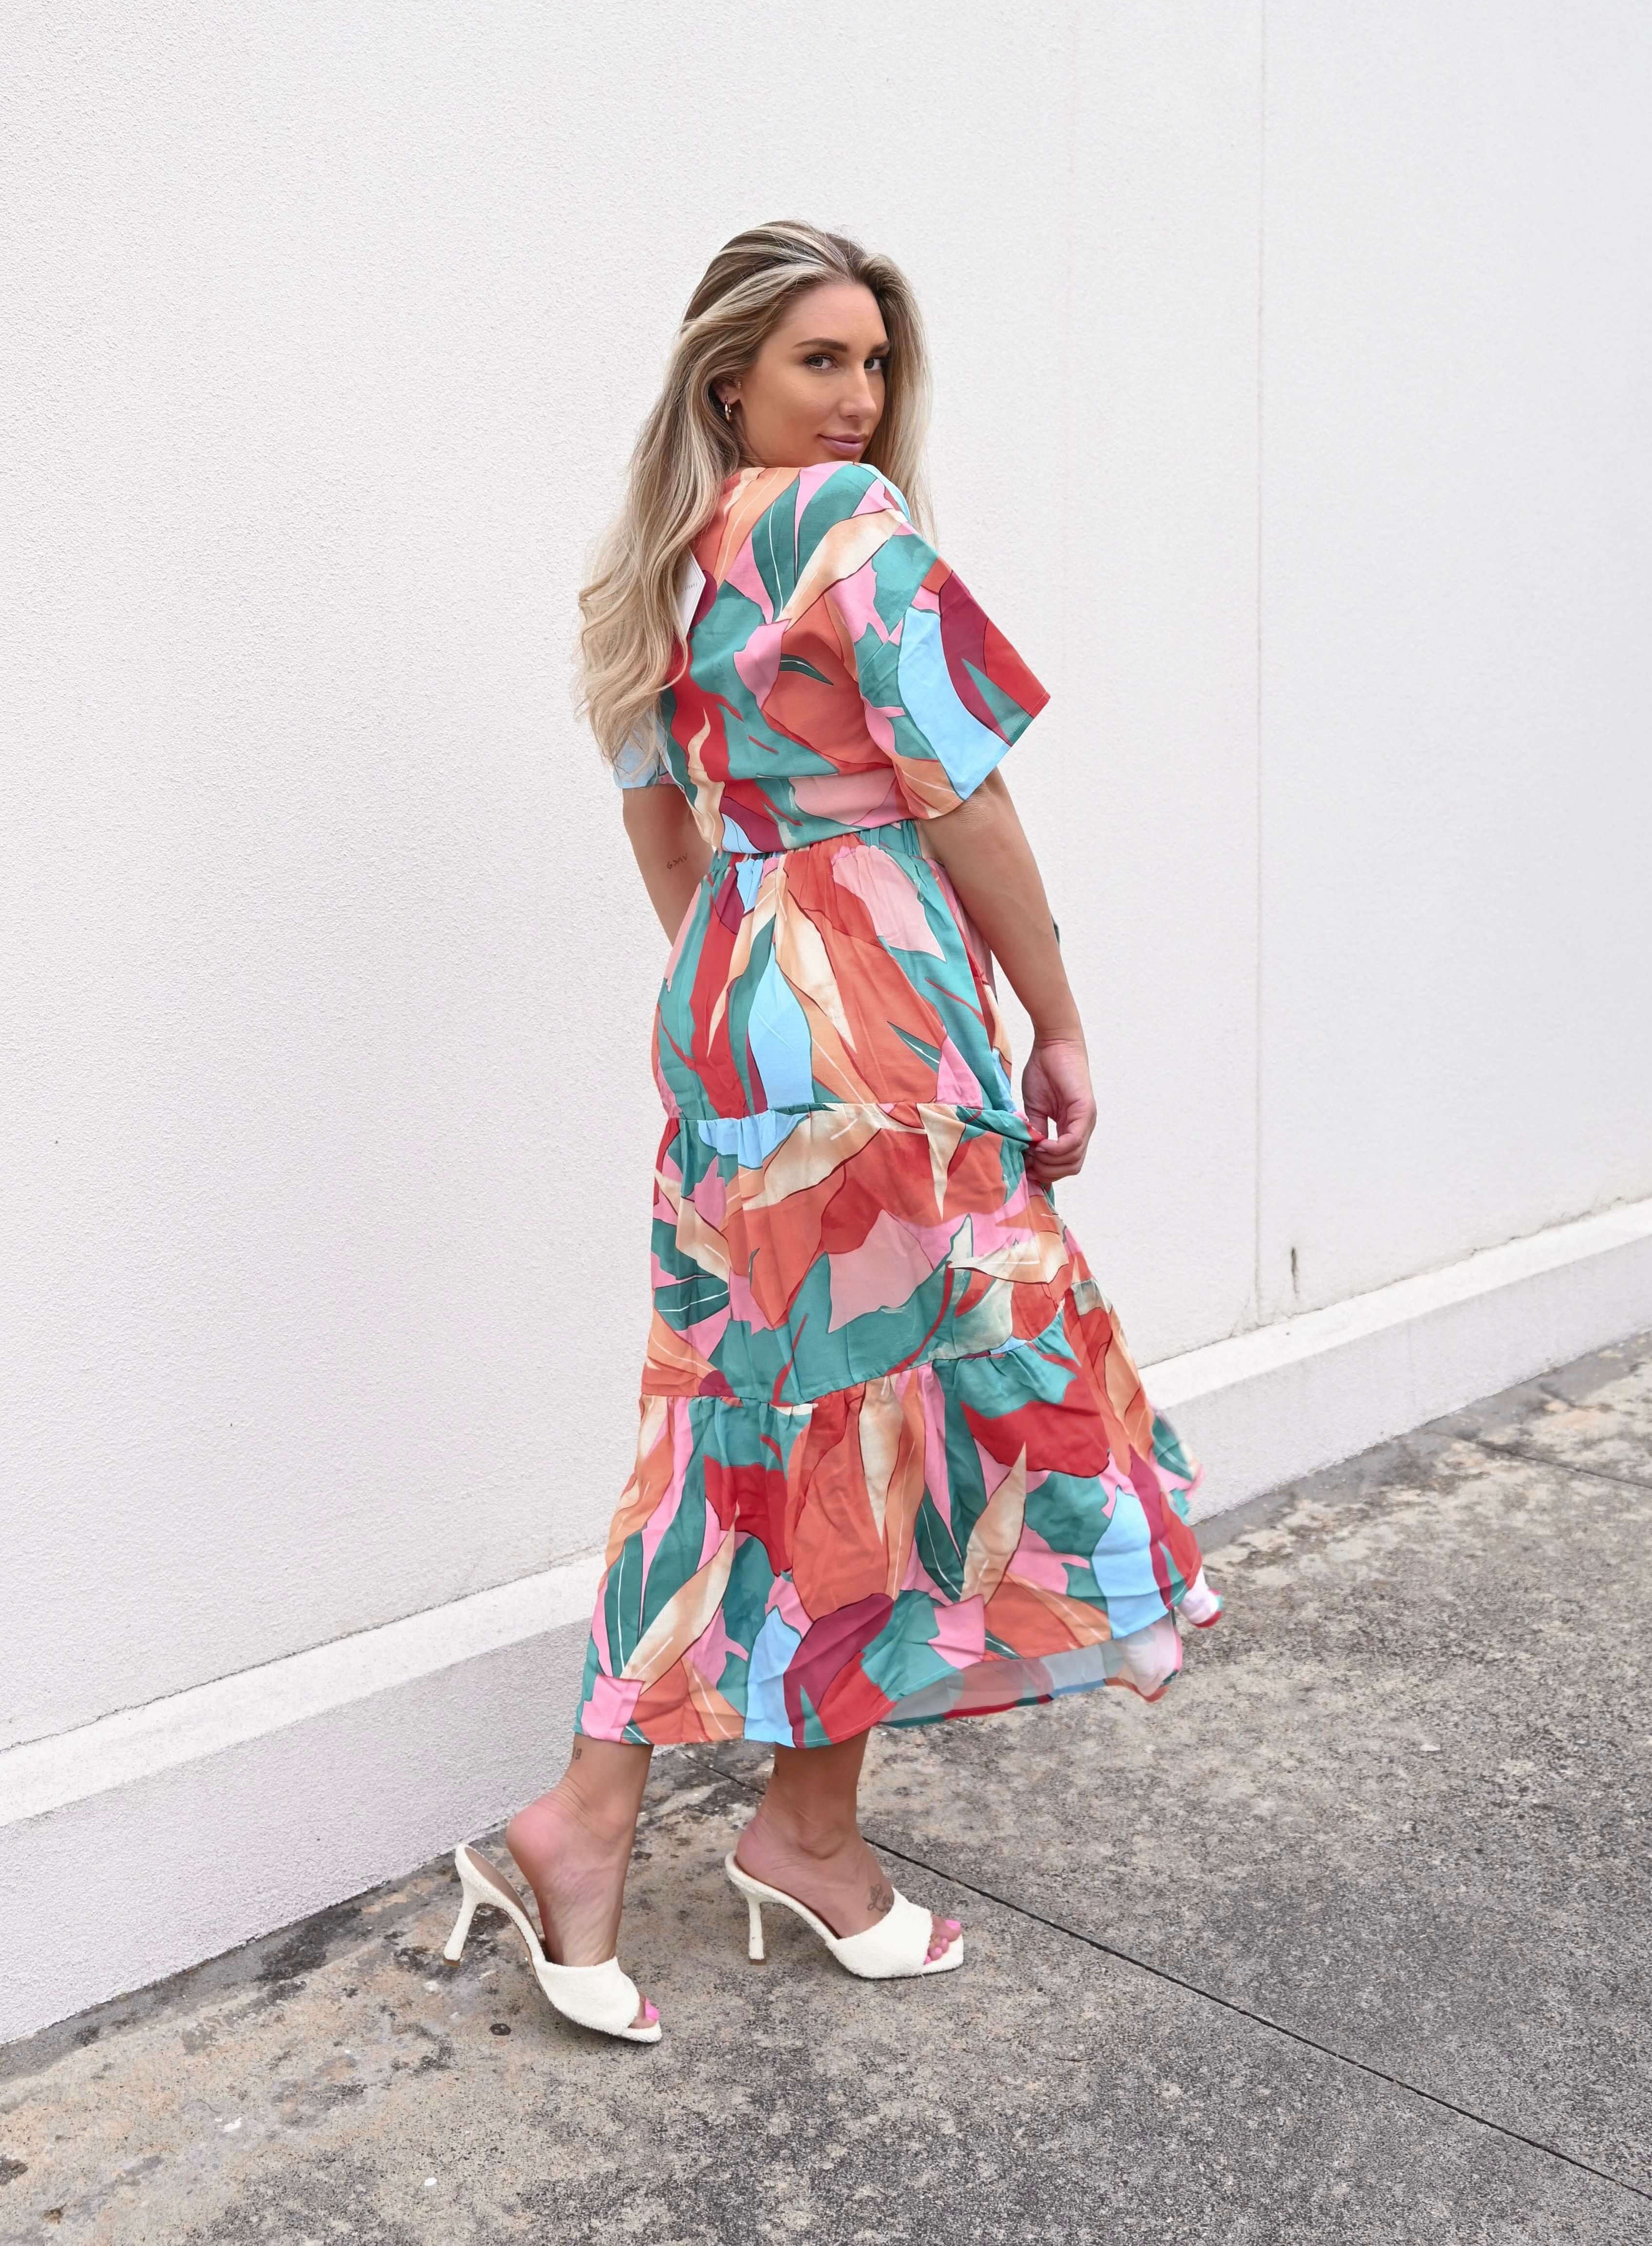 13 of the Best Summer Dresses for Your 2022 in Melbourne